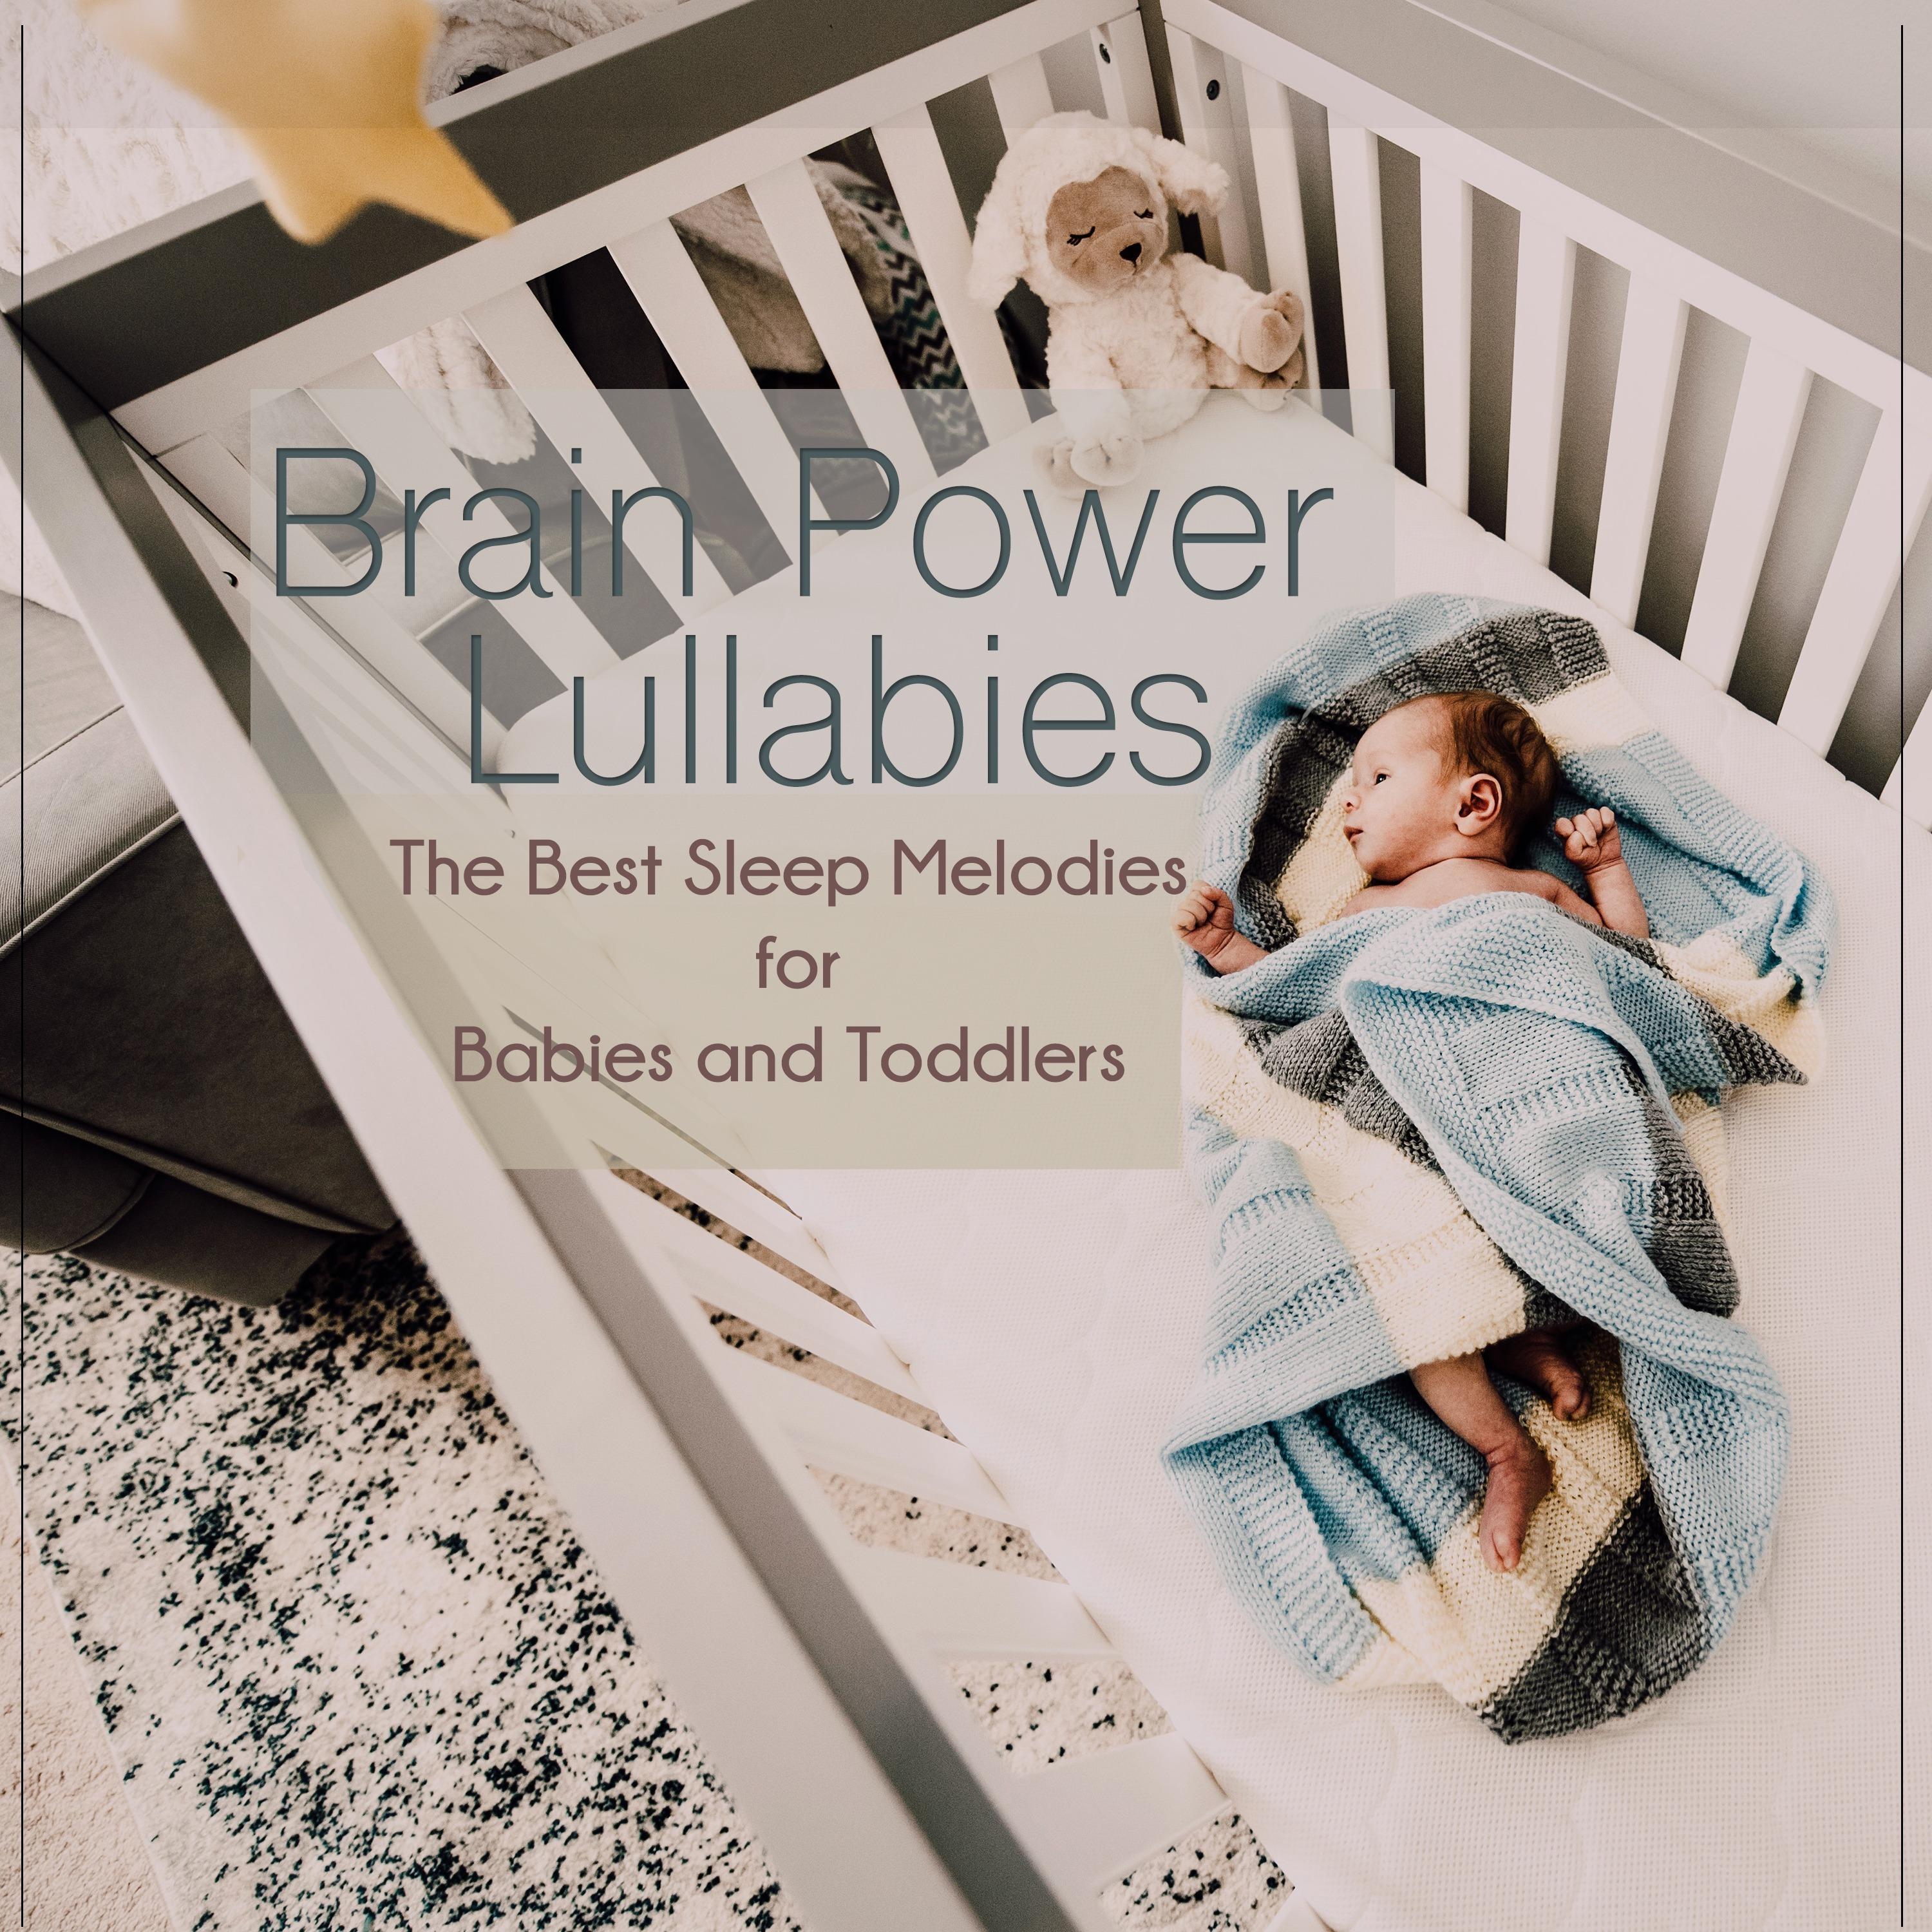 Brain Power Lullabies: The Best Sleep Melodies for Babies and Toddlers